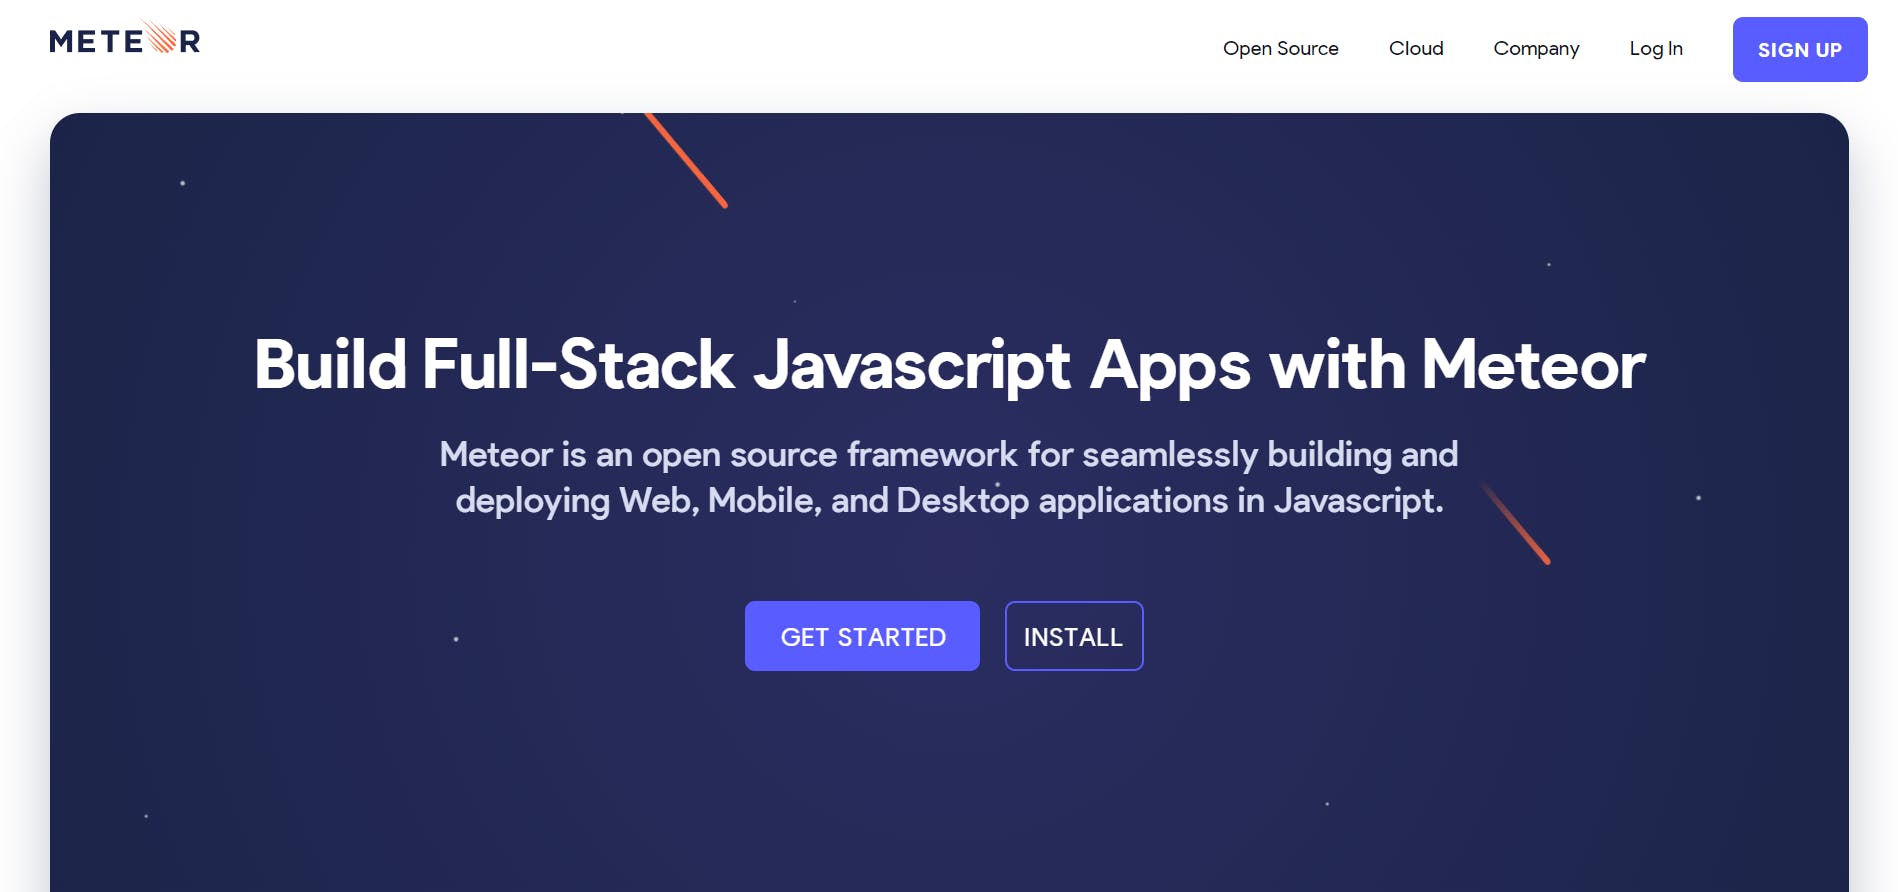 Meteor Software_ A Platform to Build, Host, Deploy and Scale Full-Stack Javascript Applications.png